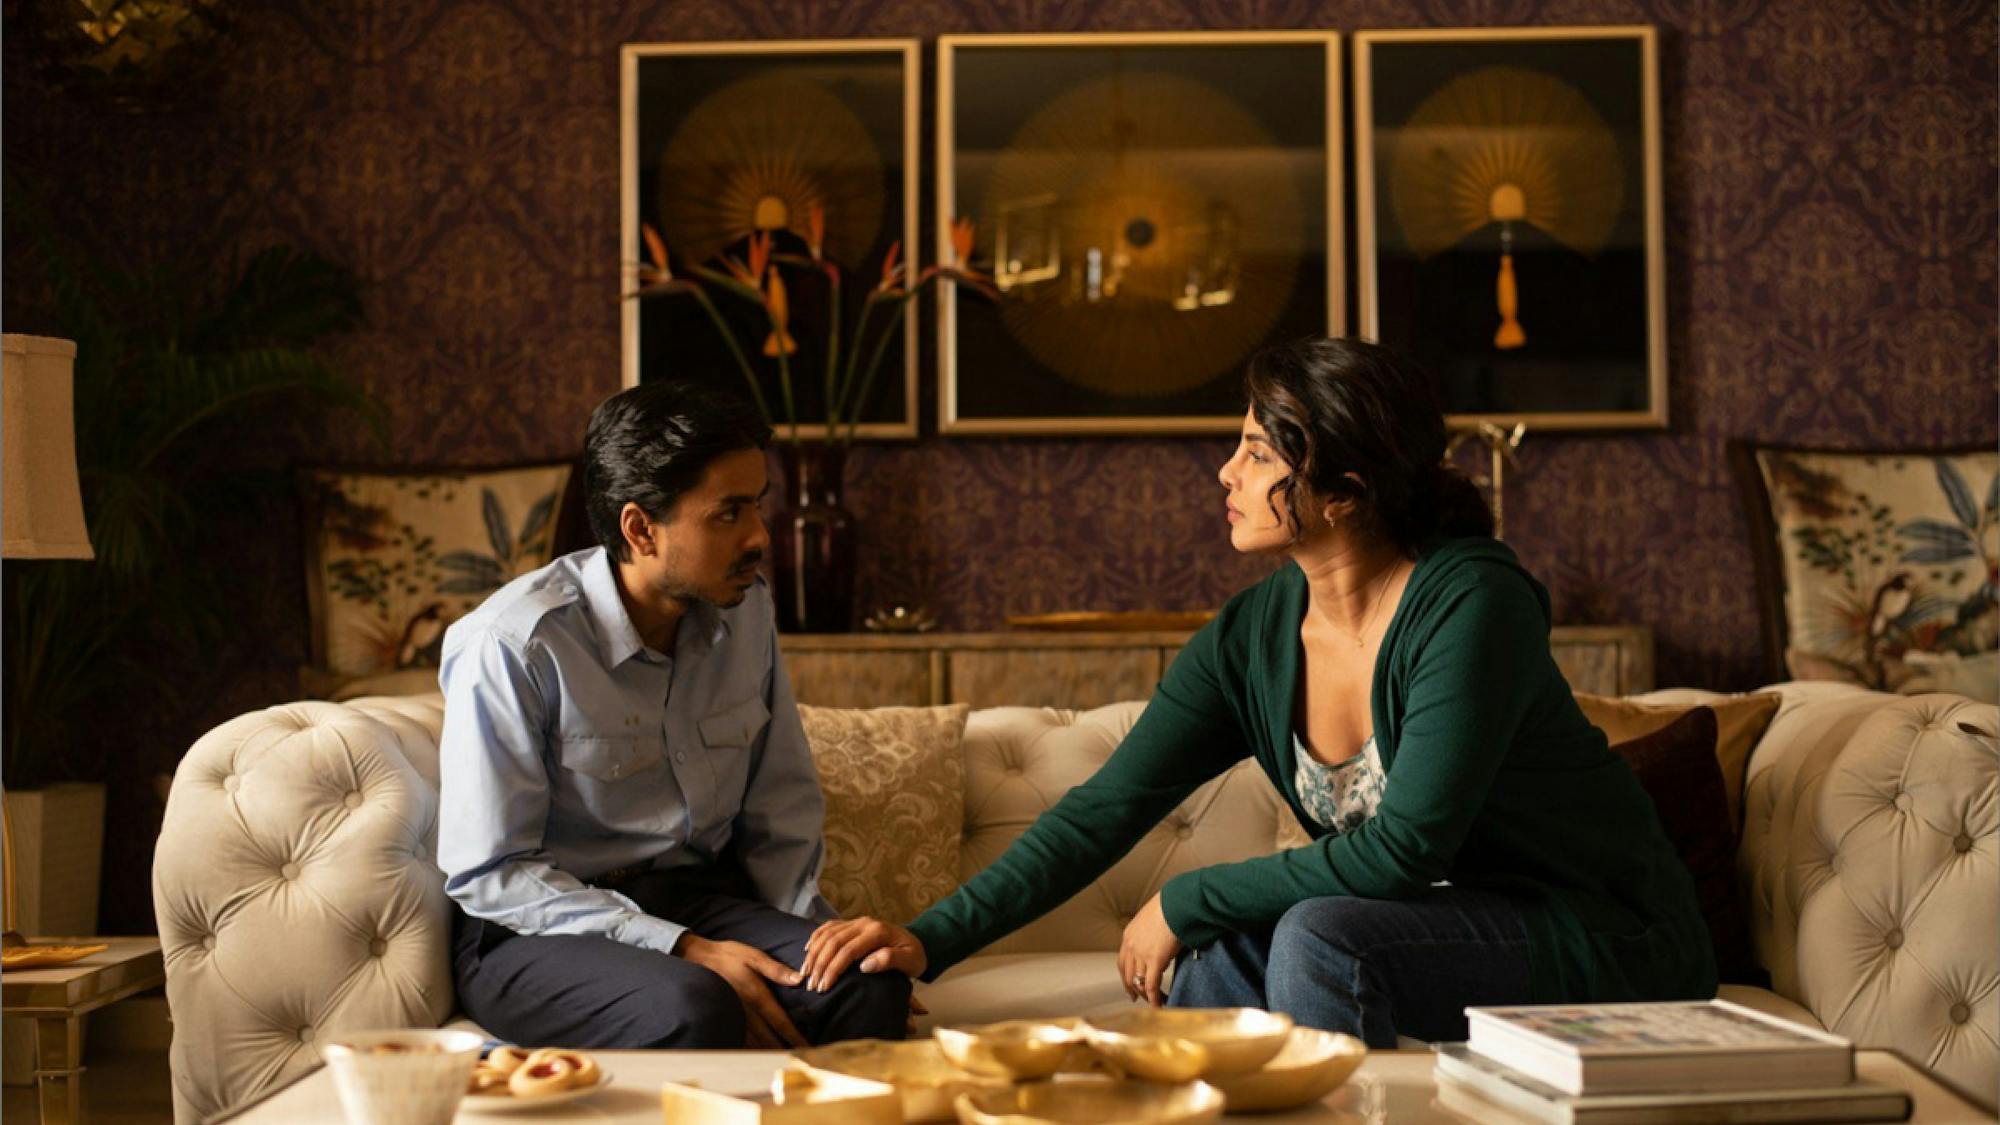 Priyanka Chopra Jonas, as Pinky Madam, is sitting on a couch with Balram, played by Adarsh Gourav. They are facing each other and she has her hand reached out on his knee as if she is comforting him. They are in a nicely decorated room and a coffee table in front of them looks to have some snacks set out.